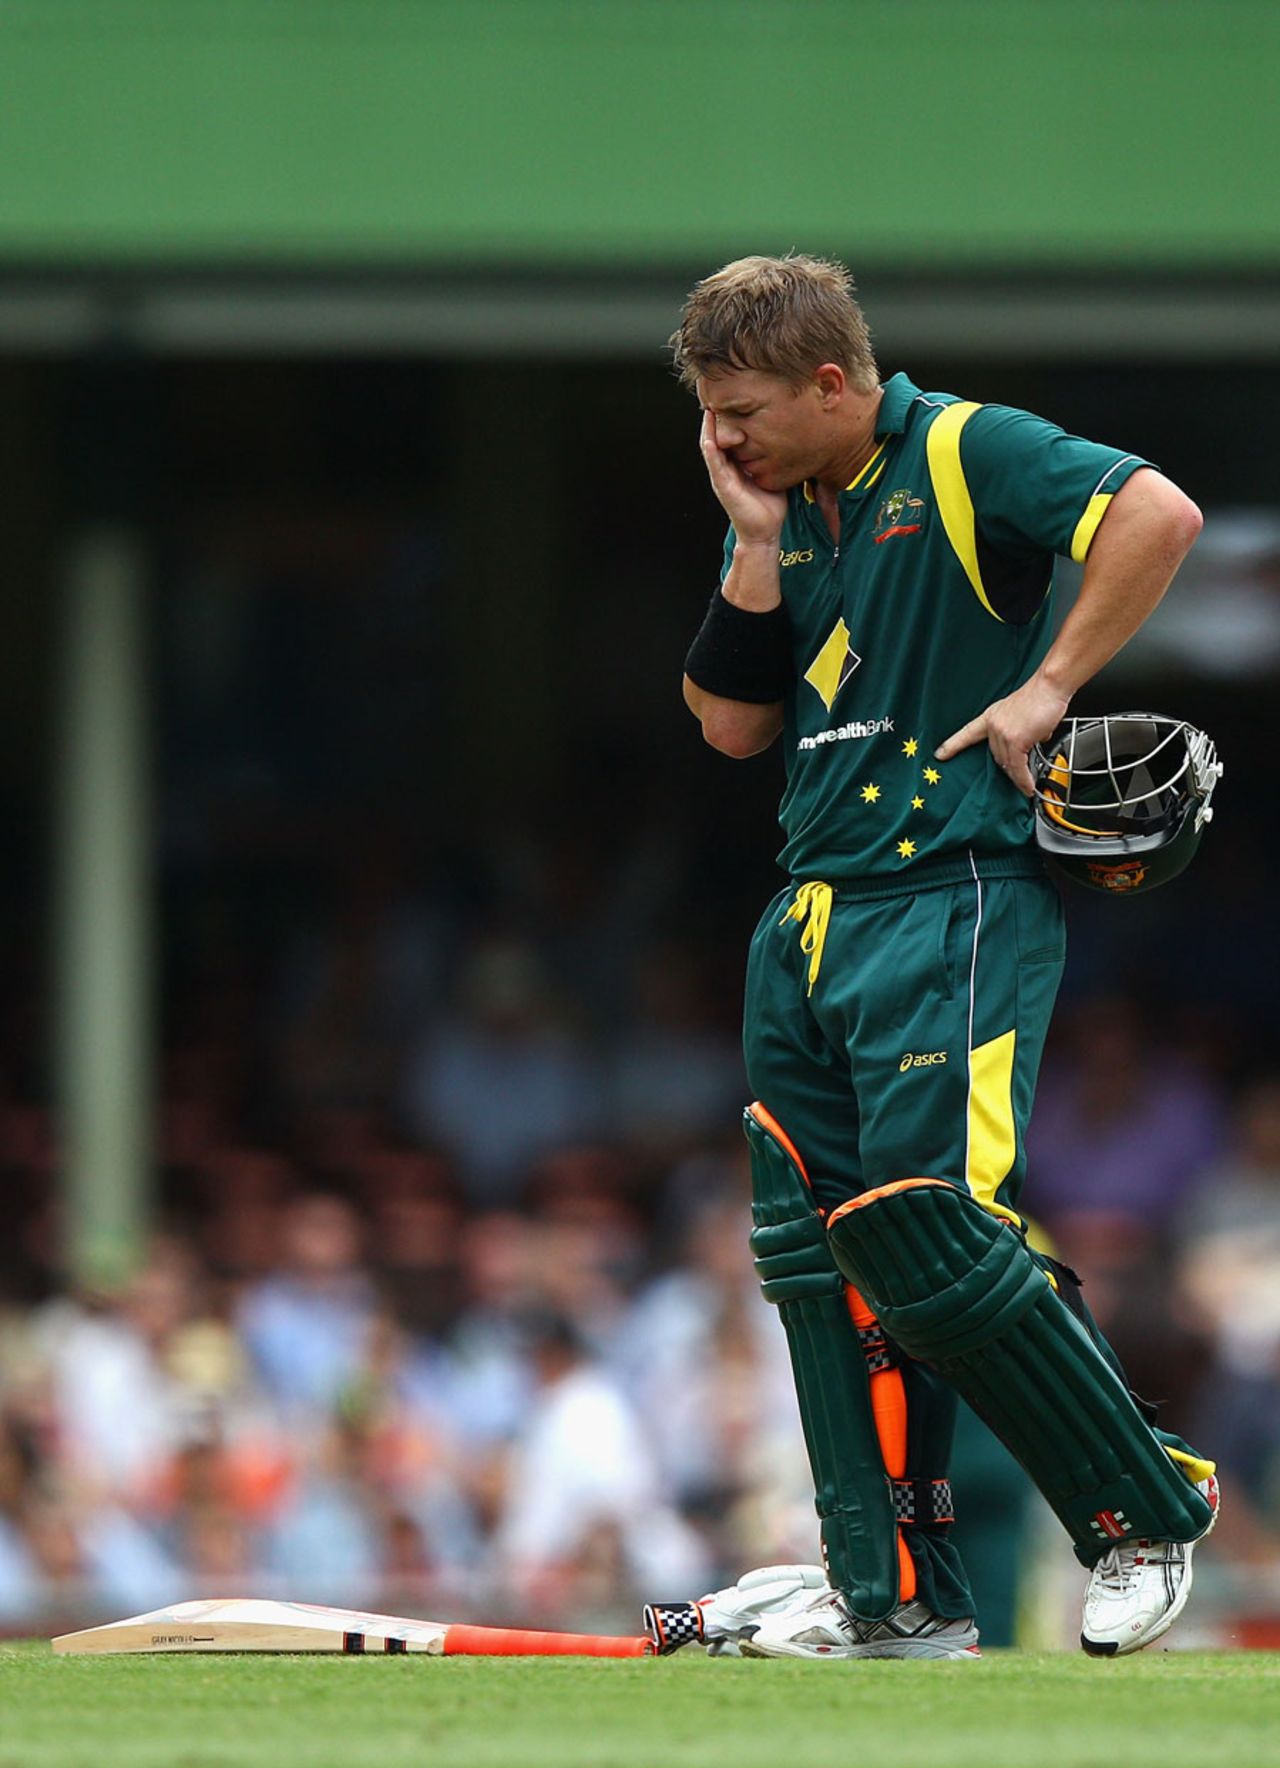 David Warner reacts after Michael Hussey is run out, Australia v India, CB Series, Sydney, February 26, 2012